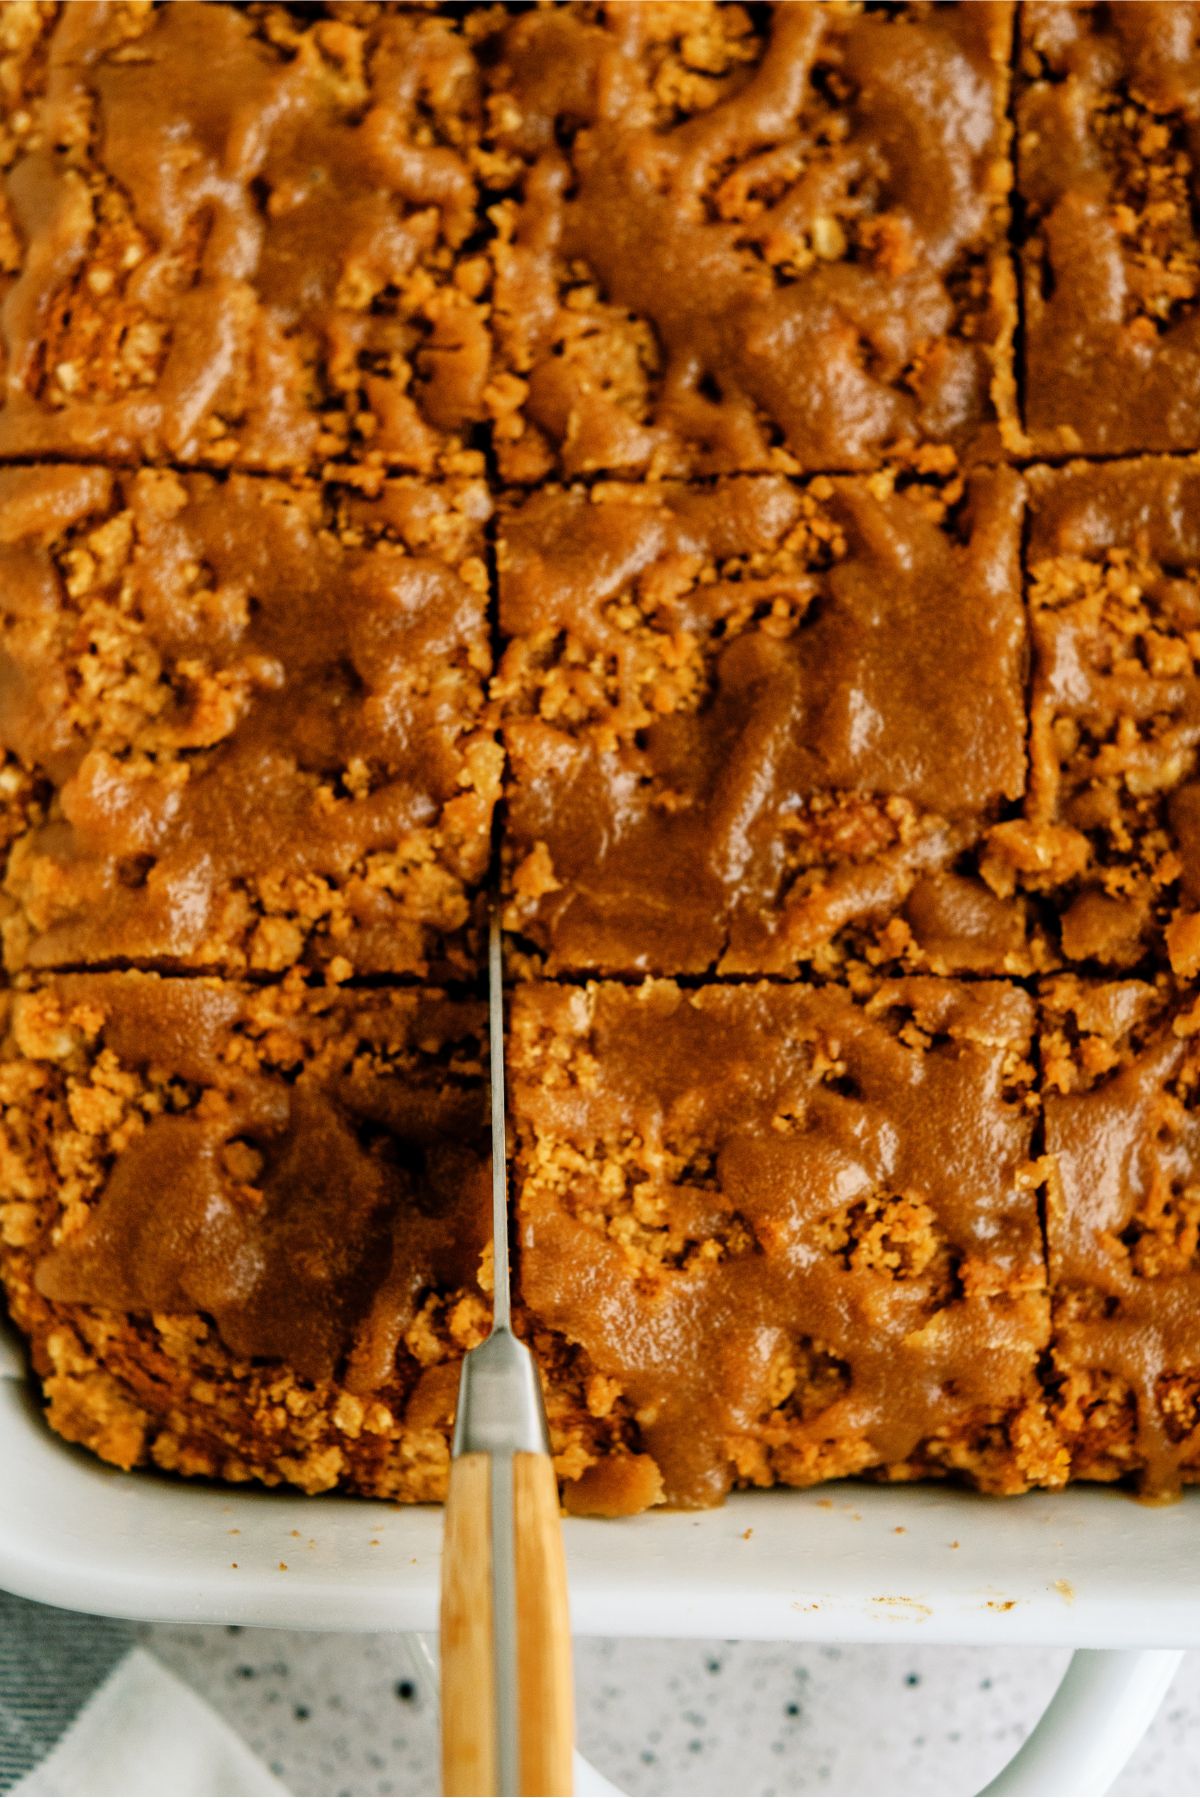 A pan of Pumpkin Coffee Cake with Brown Sugar Glaze with a knife slicing it into squares